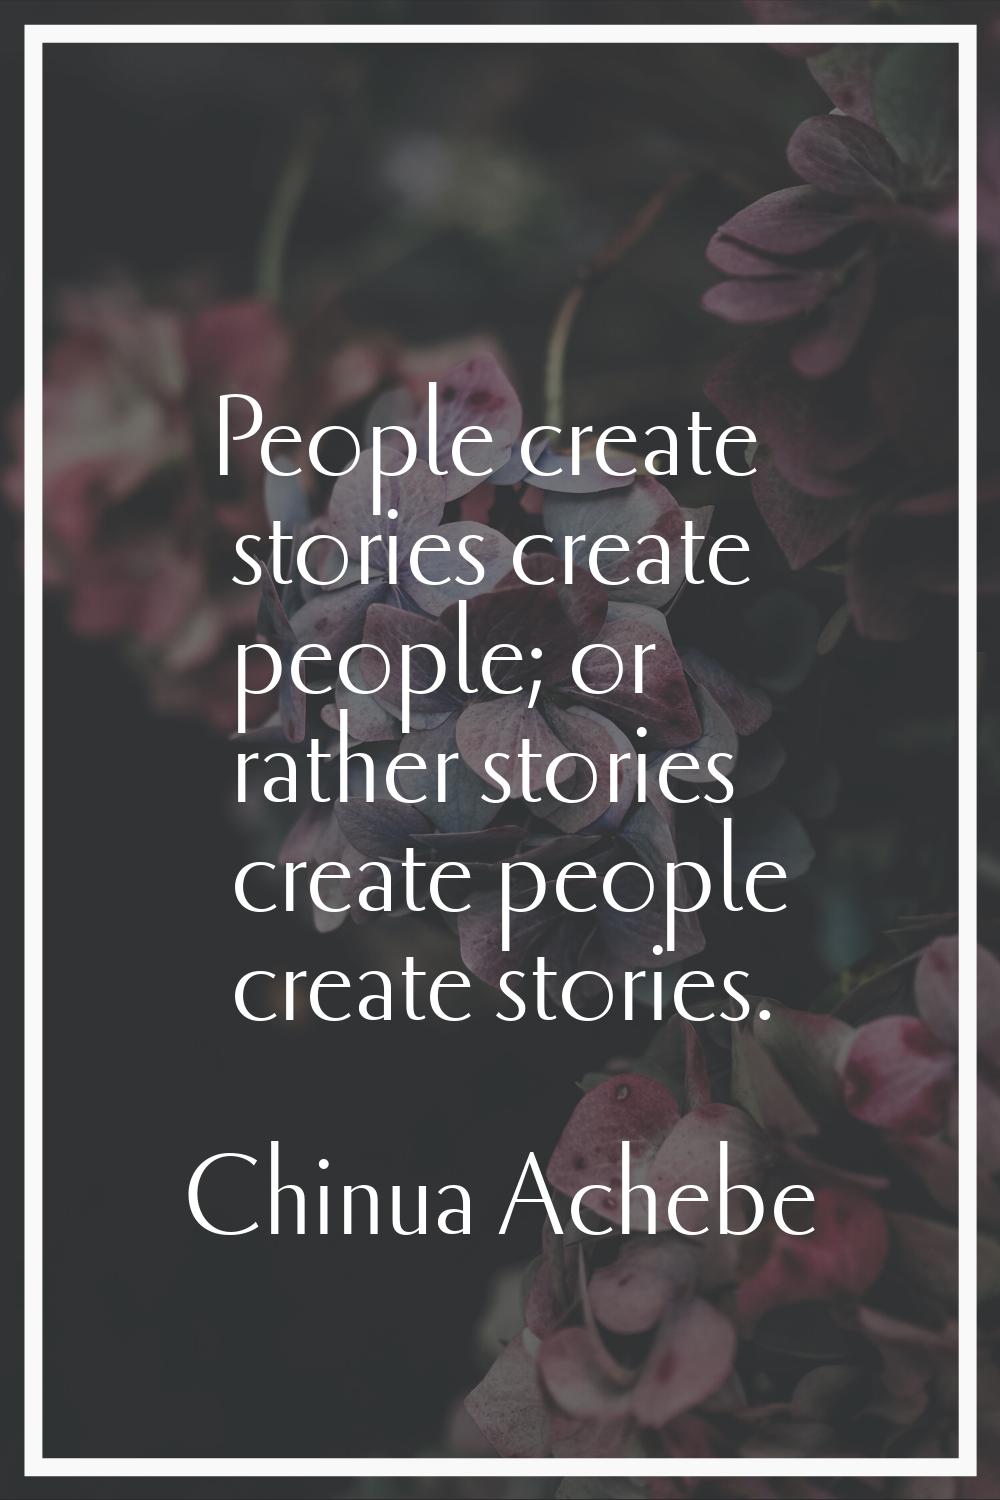 People create stories create people; or rather stories create people create stories.